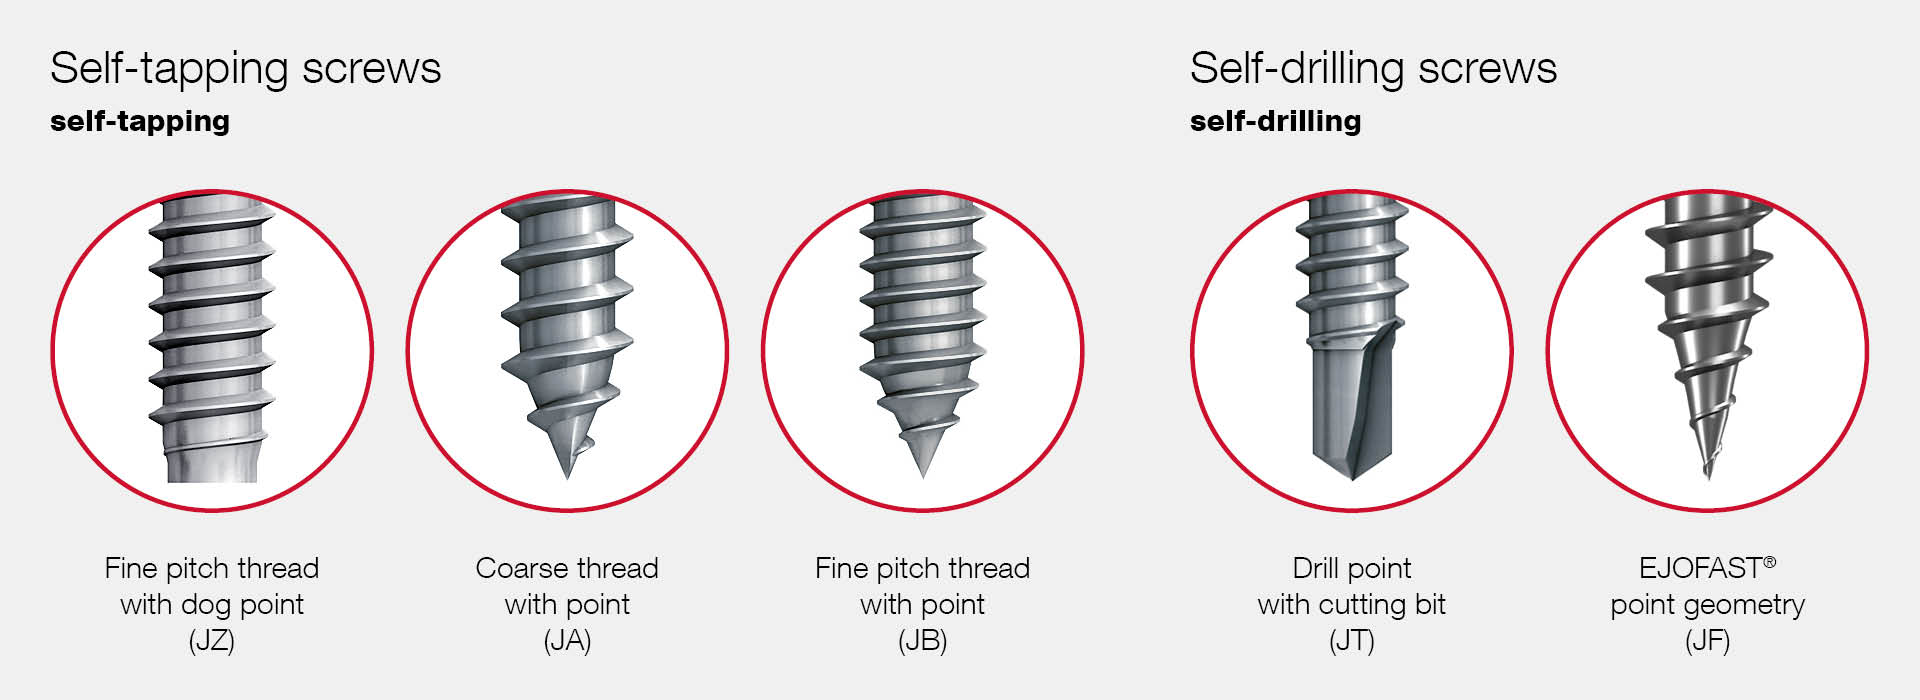 Set Screws and Its Types - Everything You Need To Know